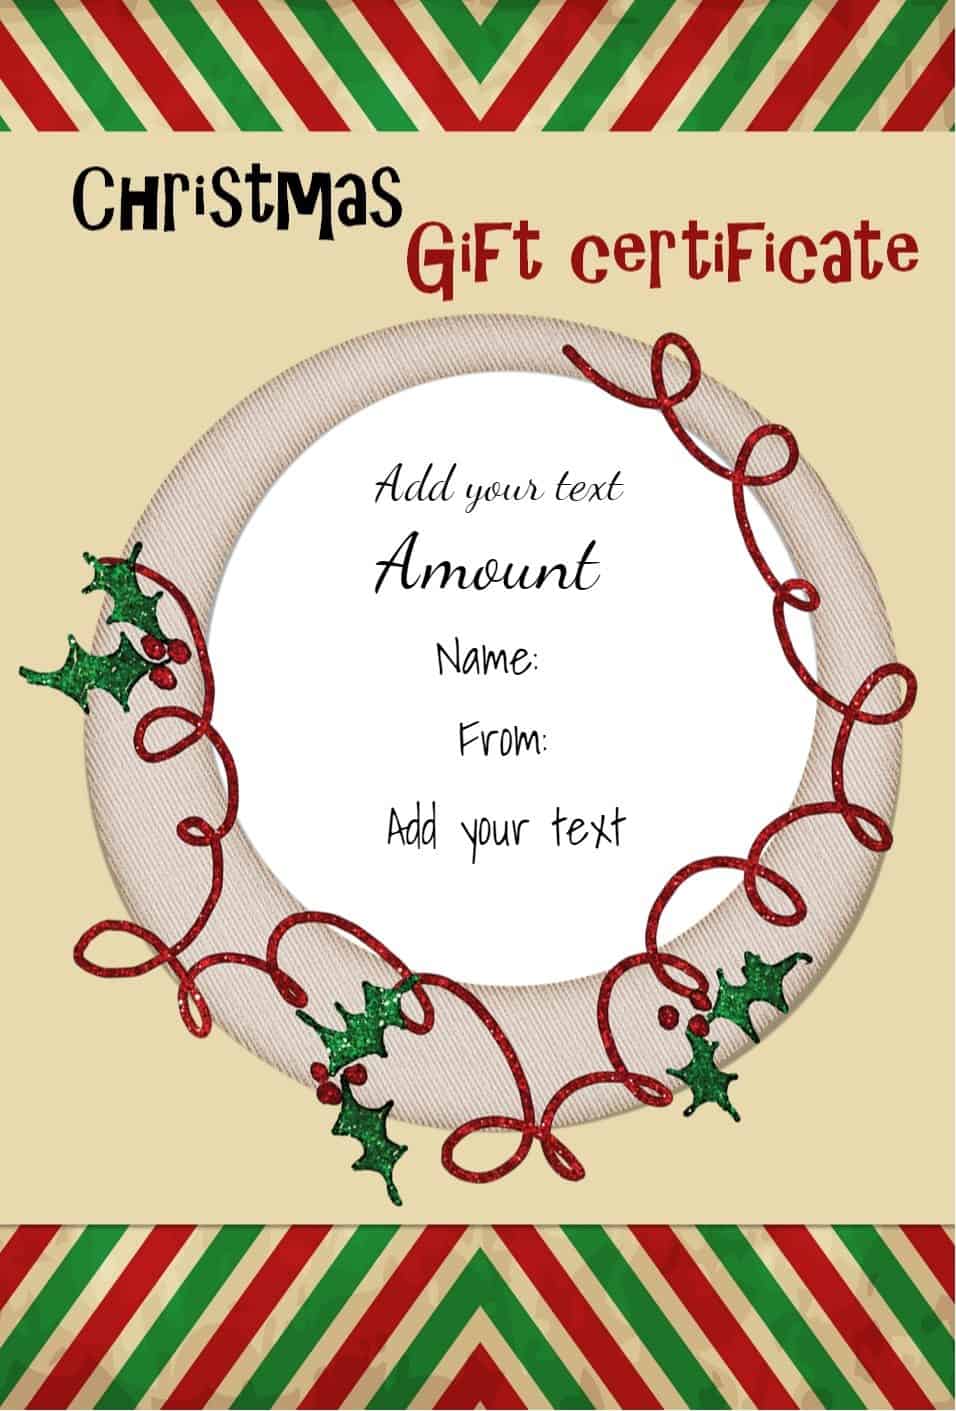 printable-gift-certificate-template-free-printable-templates